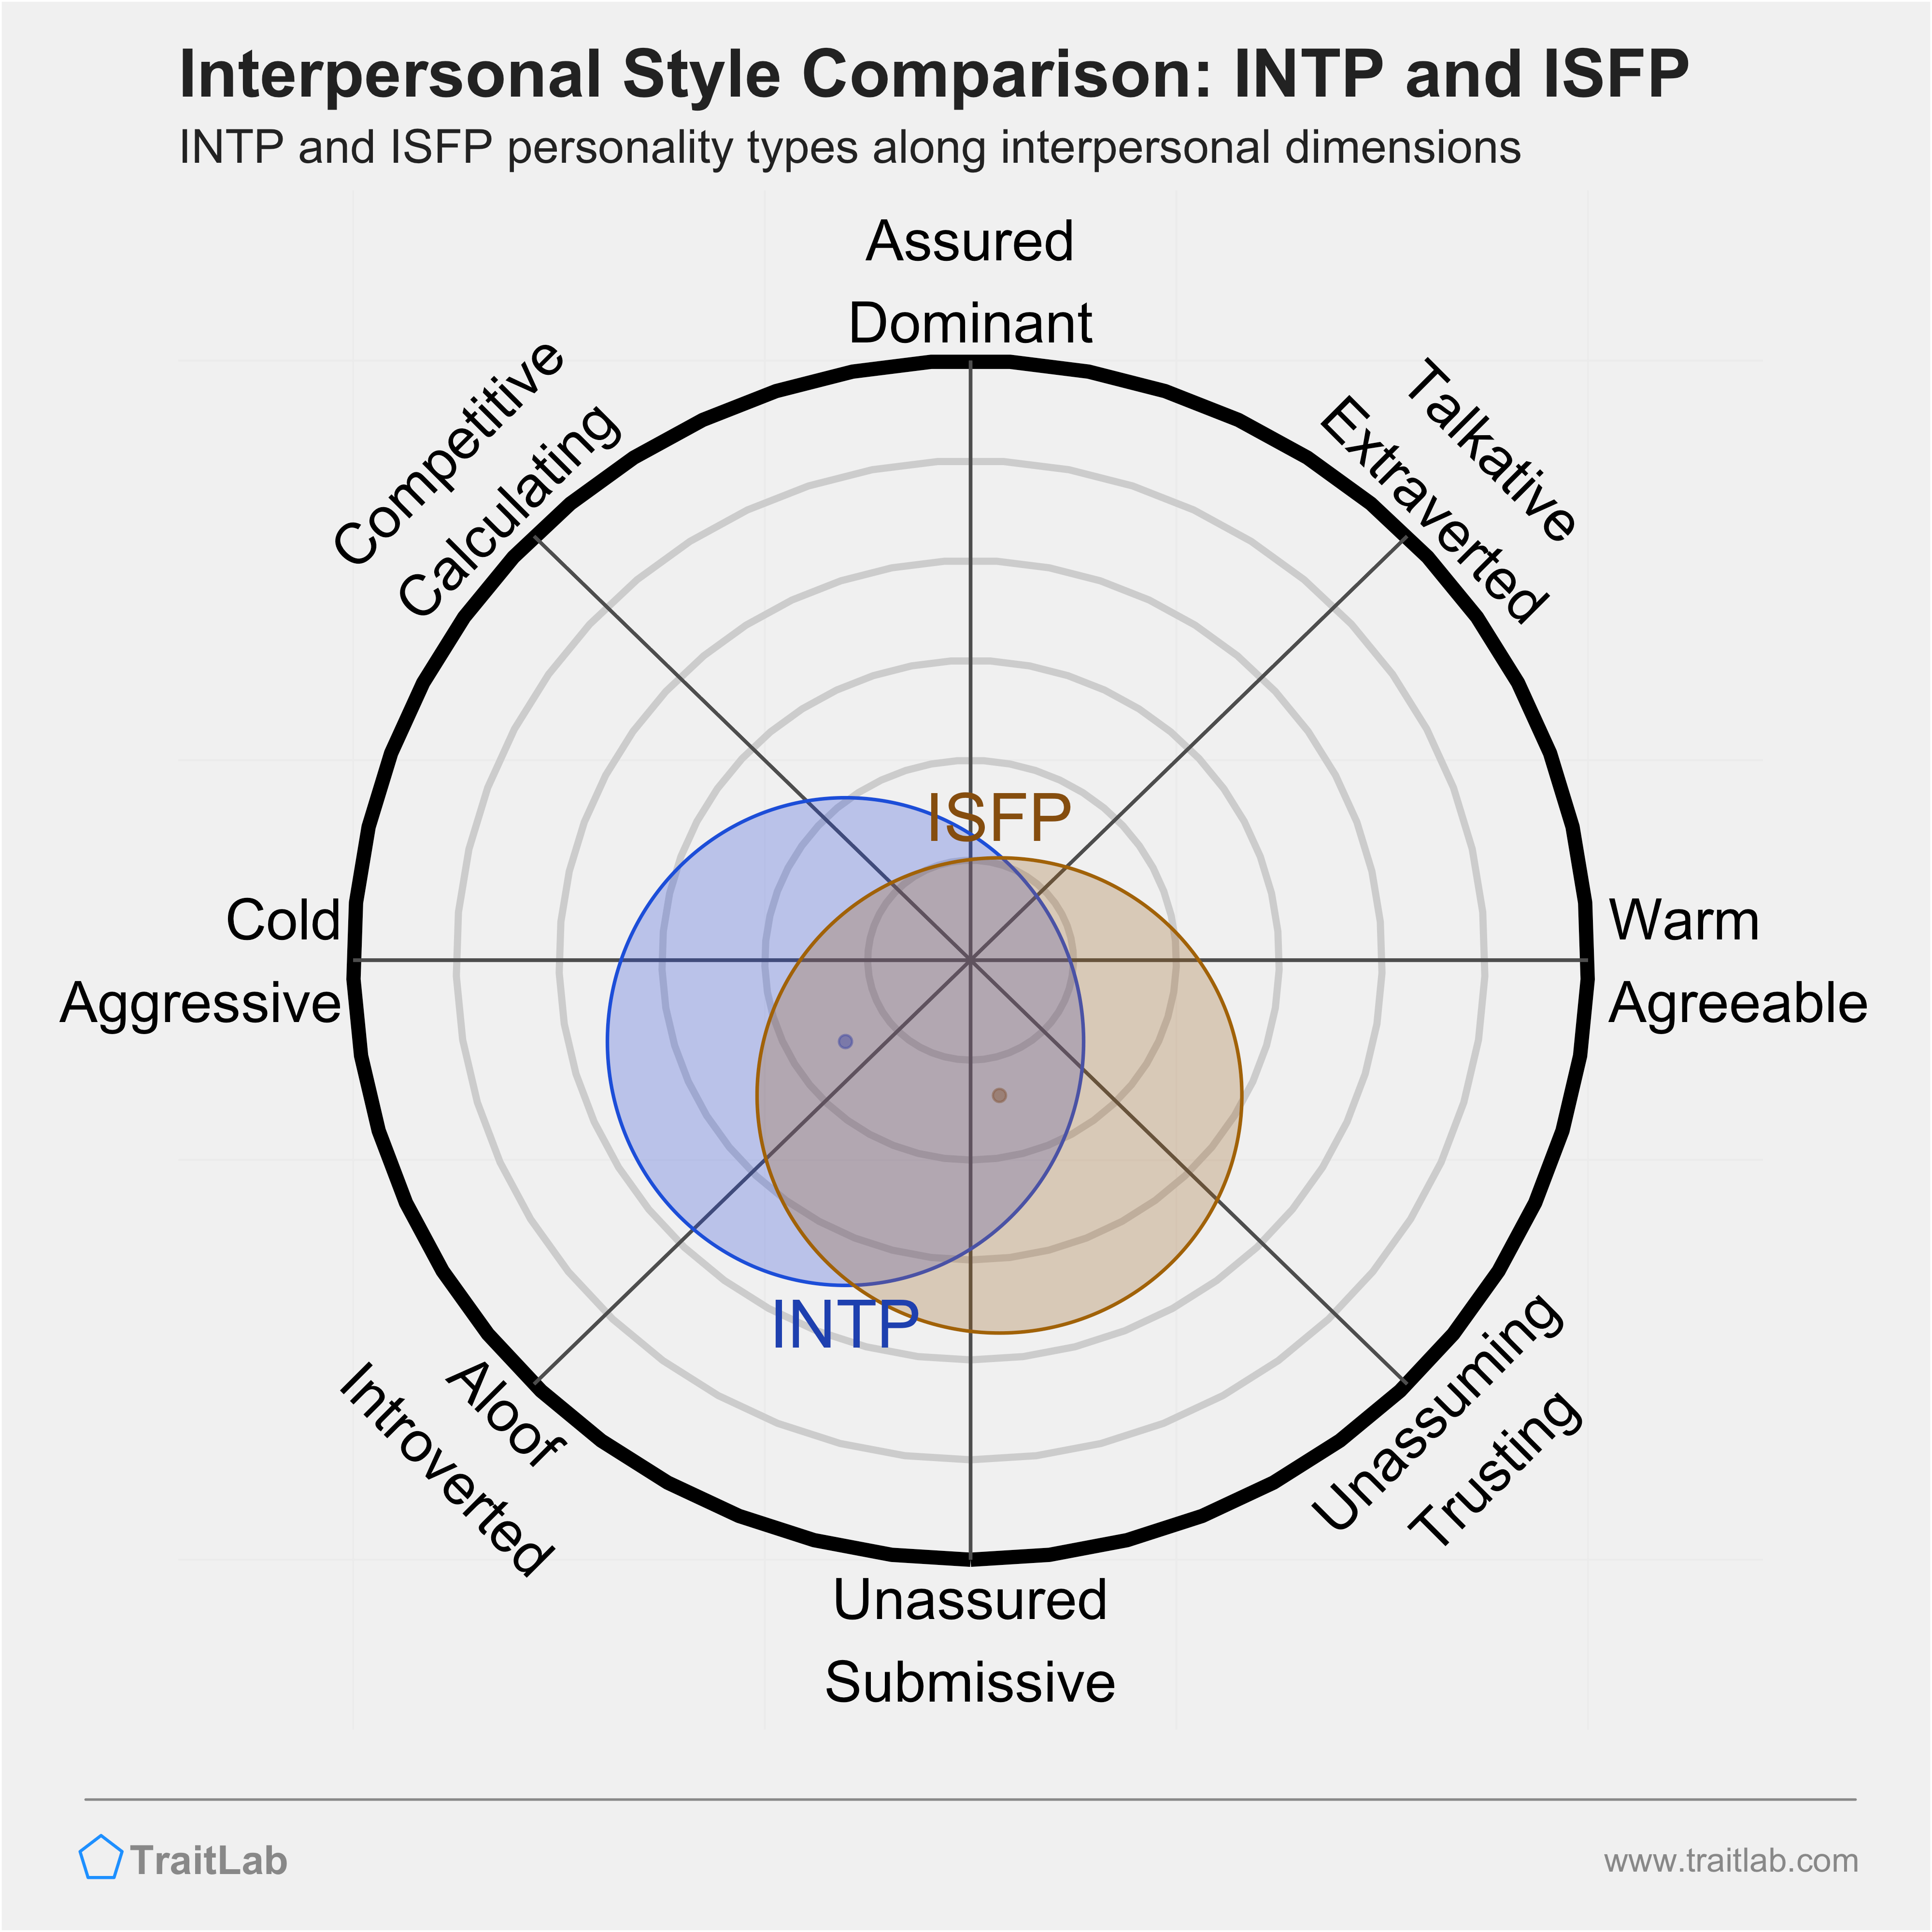 INTP and ISFP comparison across interpersonal dimensions